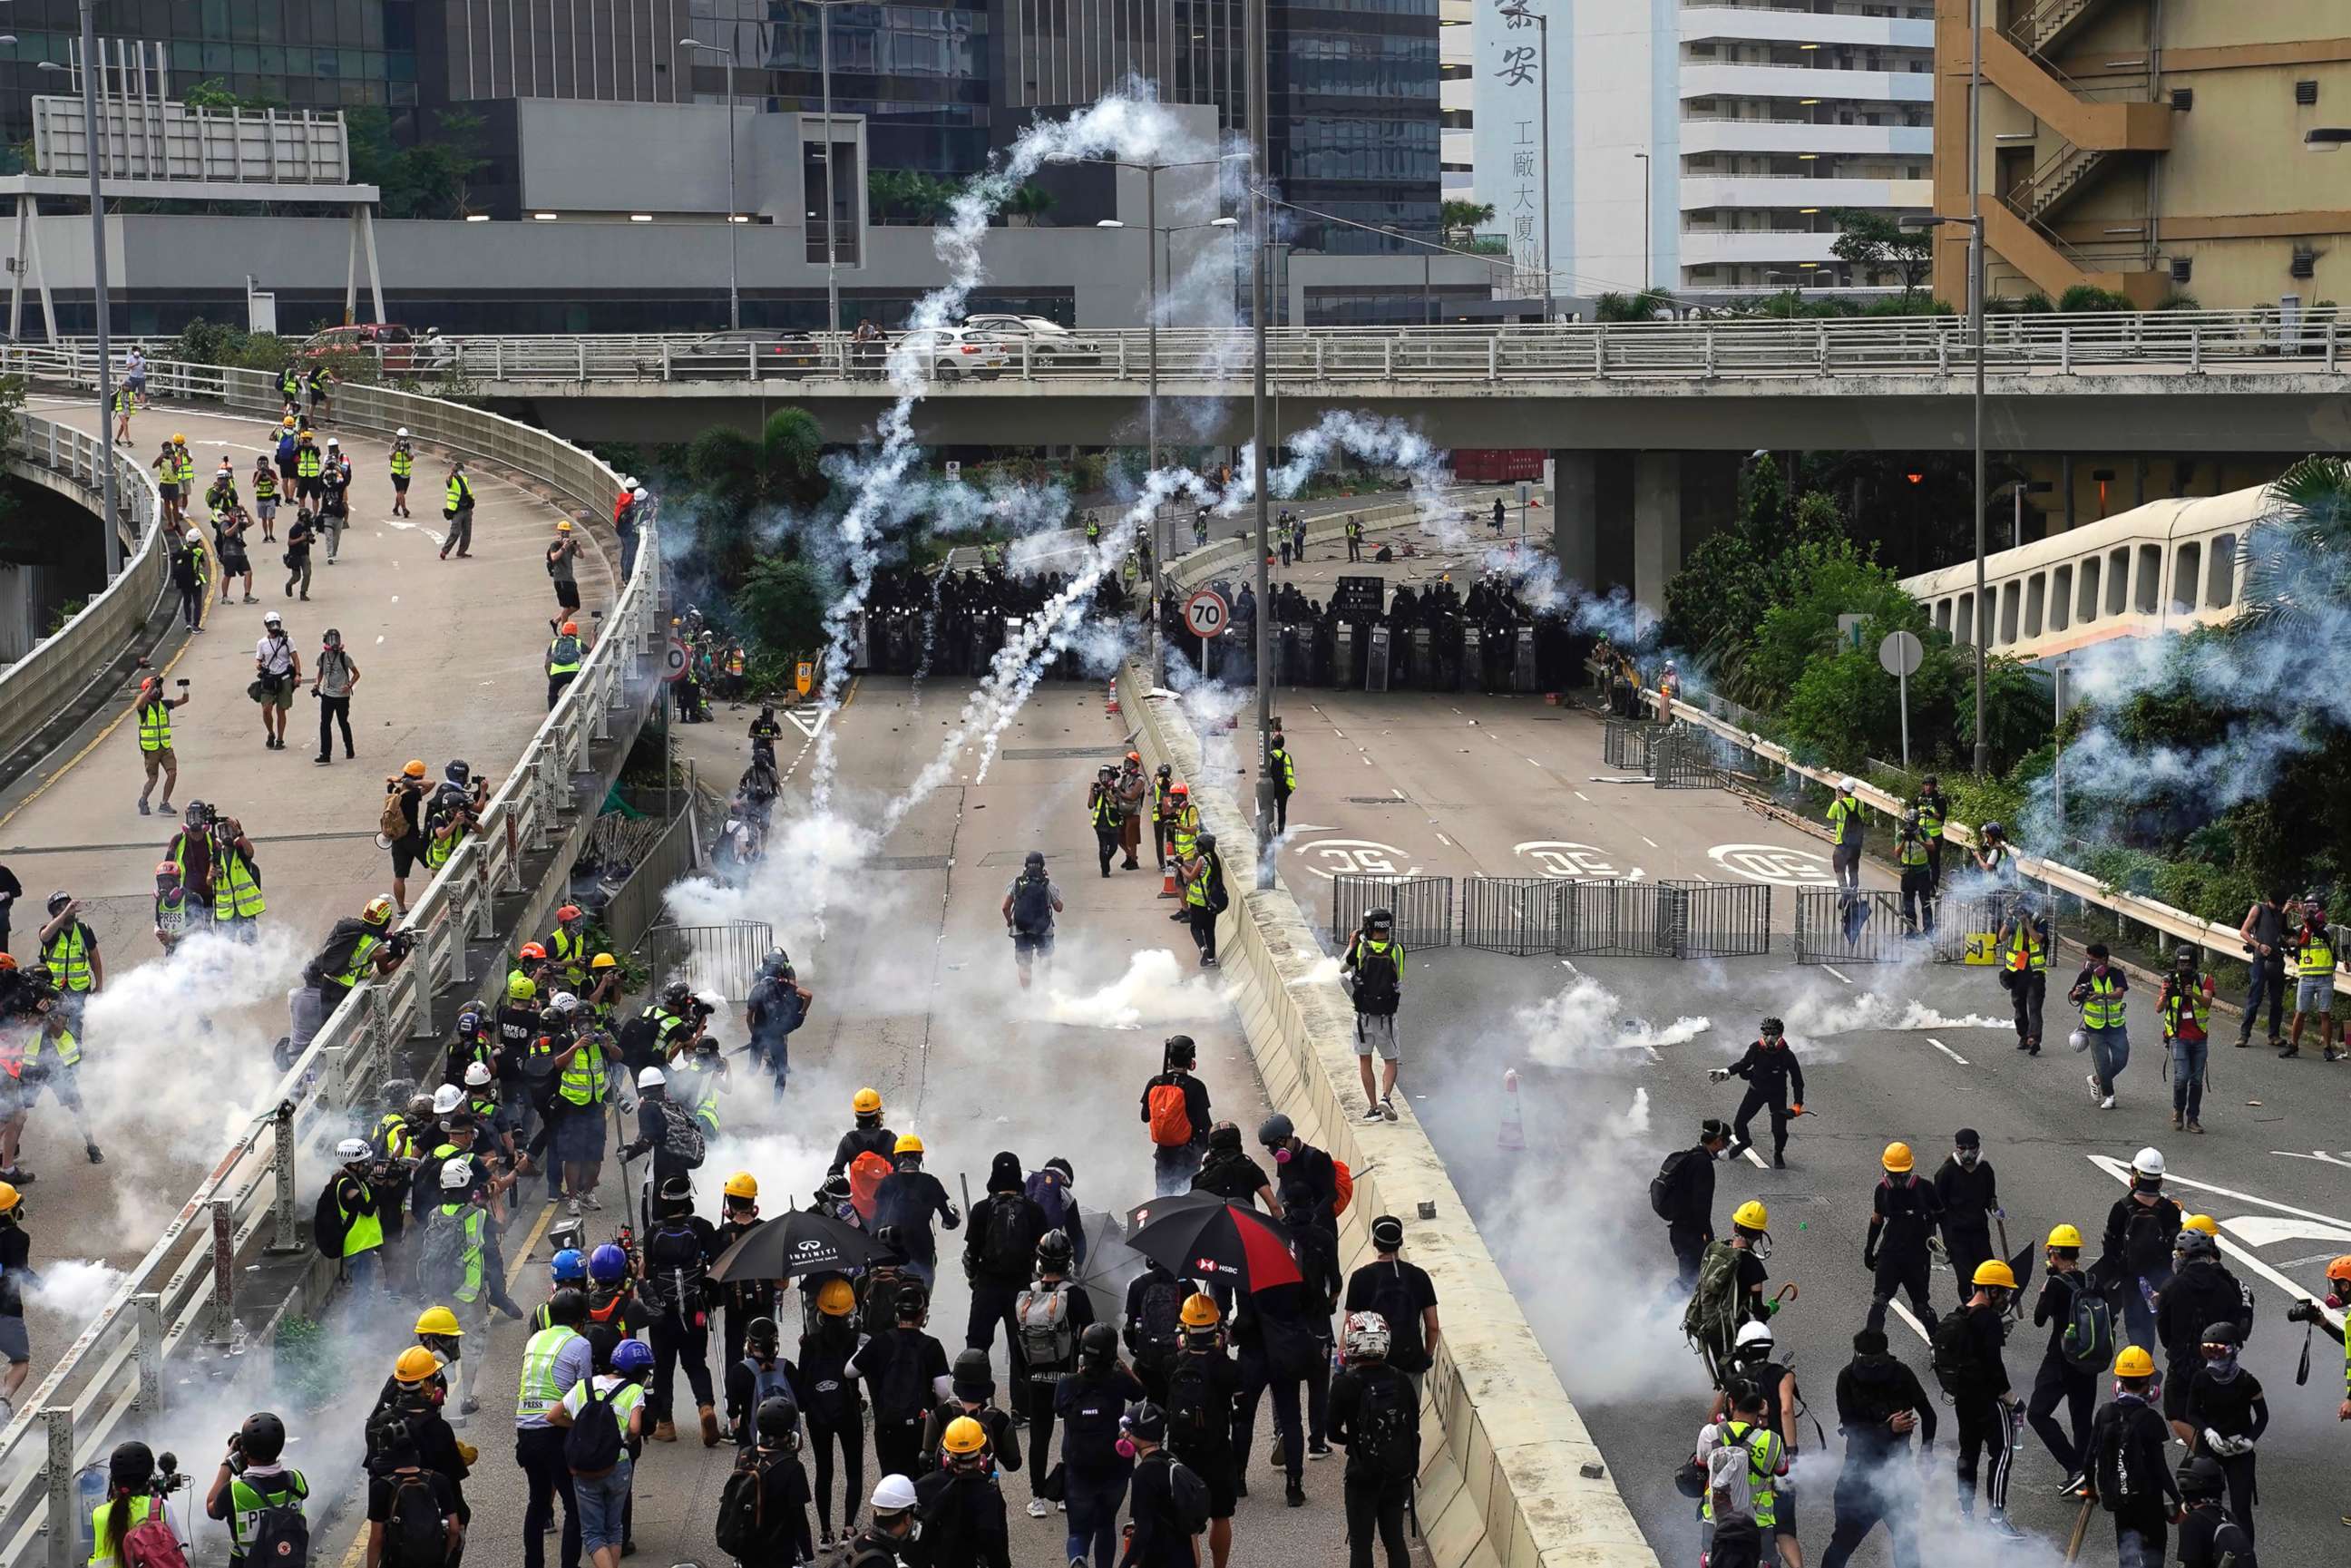 PHOTO: Clouds of smoke rise from tear gas canisters as police and demonstrators clash during a protest in Hong Kong, Saturday, Aug. 24, 2019.